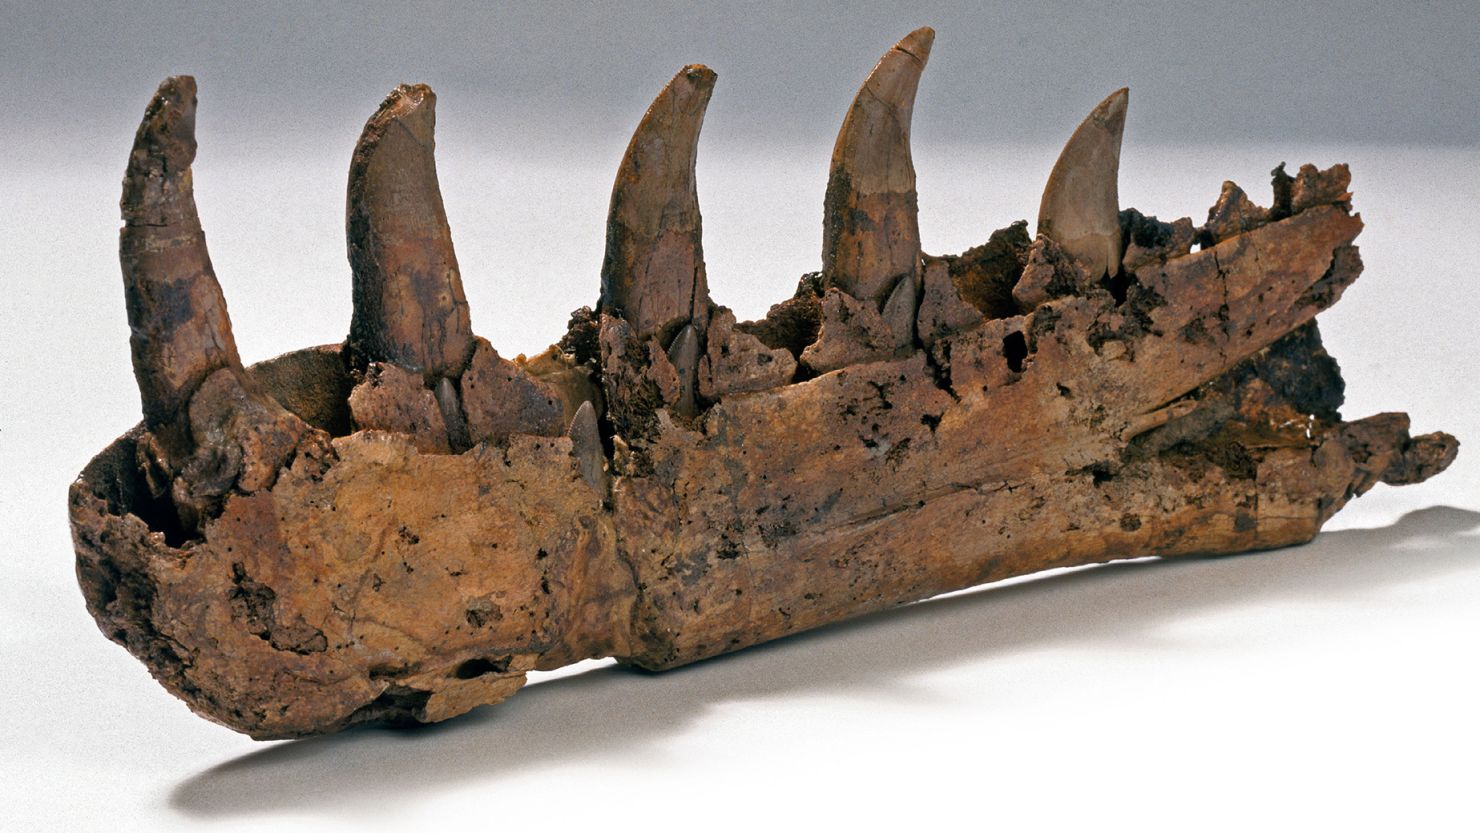 A fossilized jawbone belonging to a Megalosaurus, the first dinosaur to be scientifically described and named.